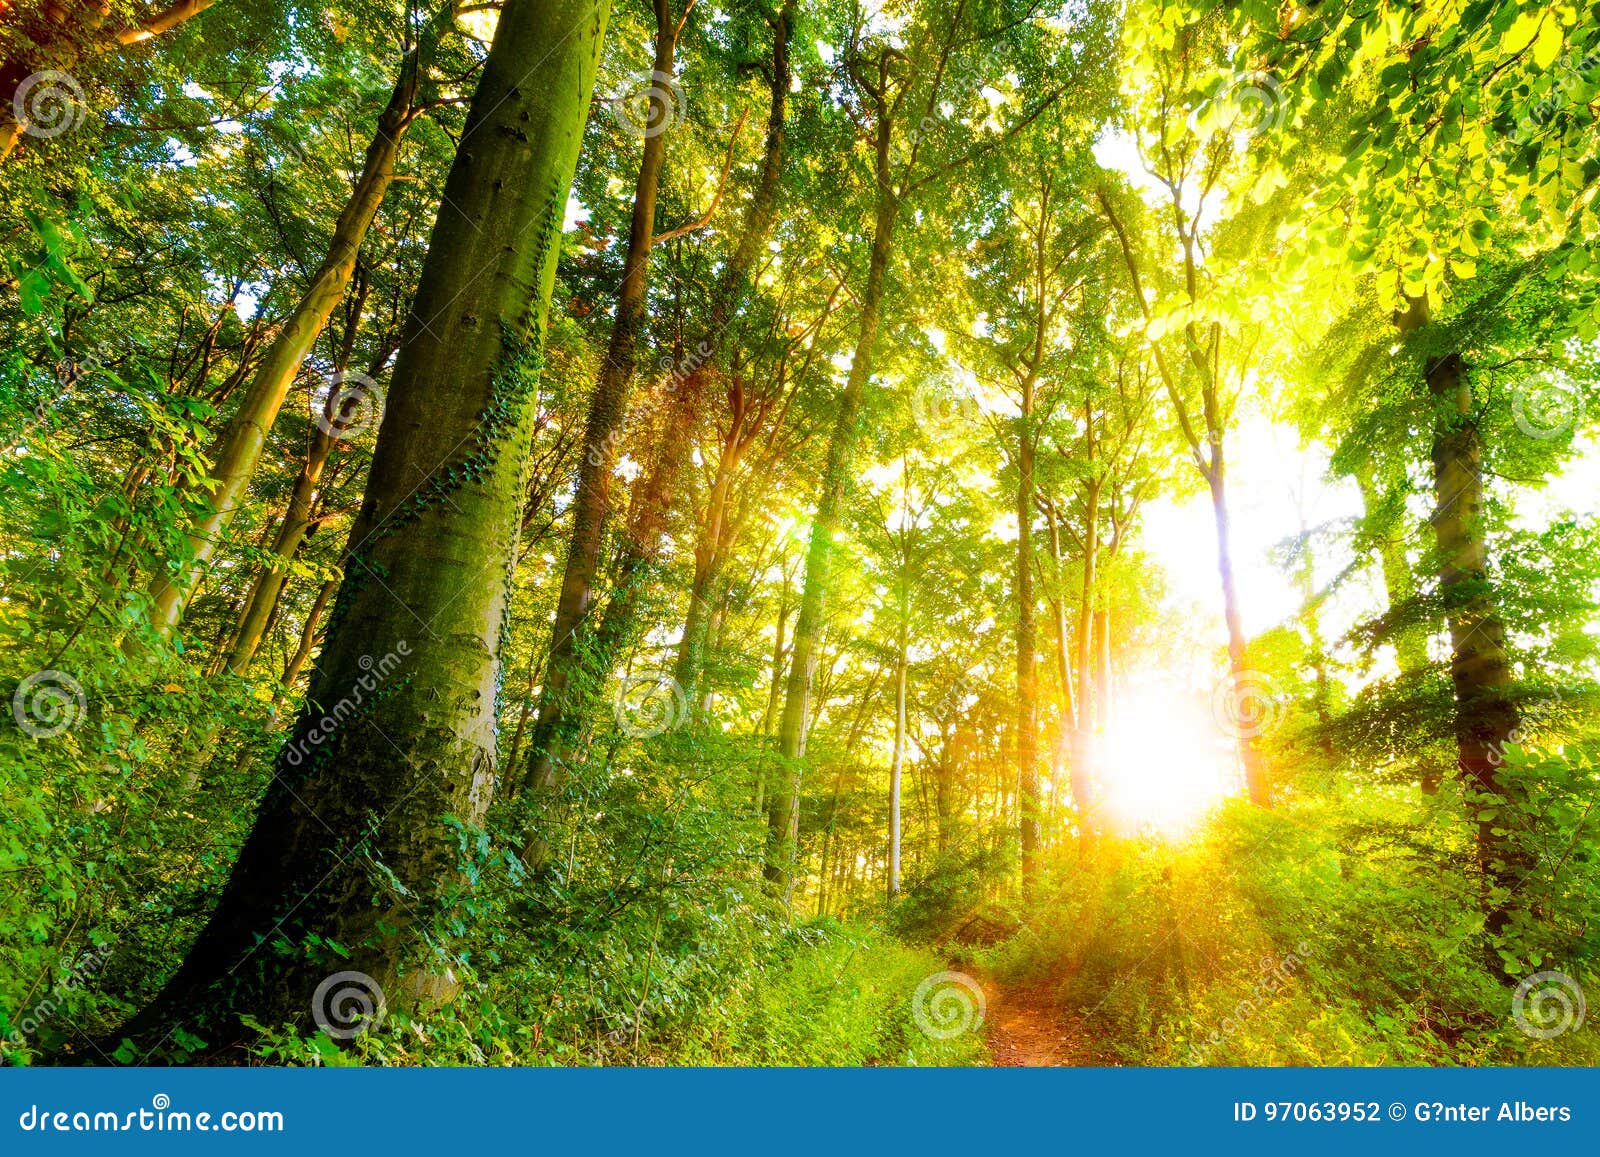 Sun Shining Through Trees In Forest Stock Photo Image Of Scenery